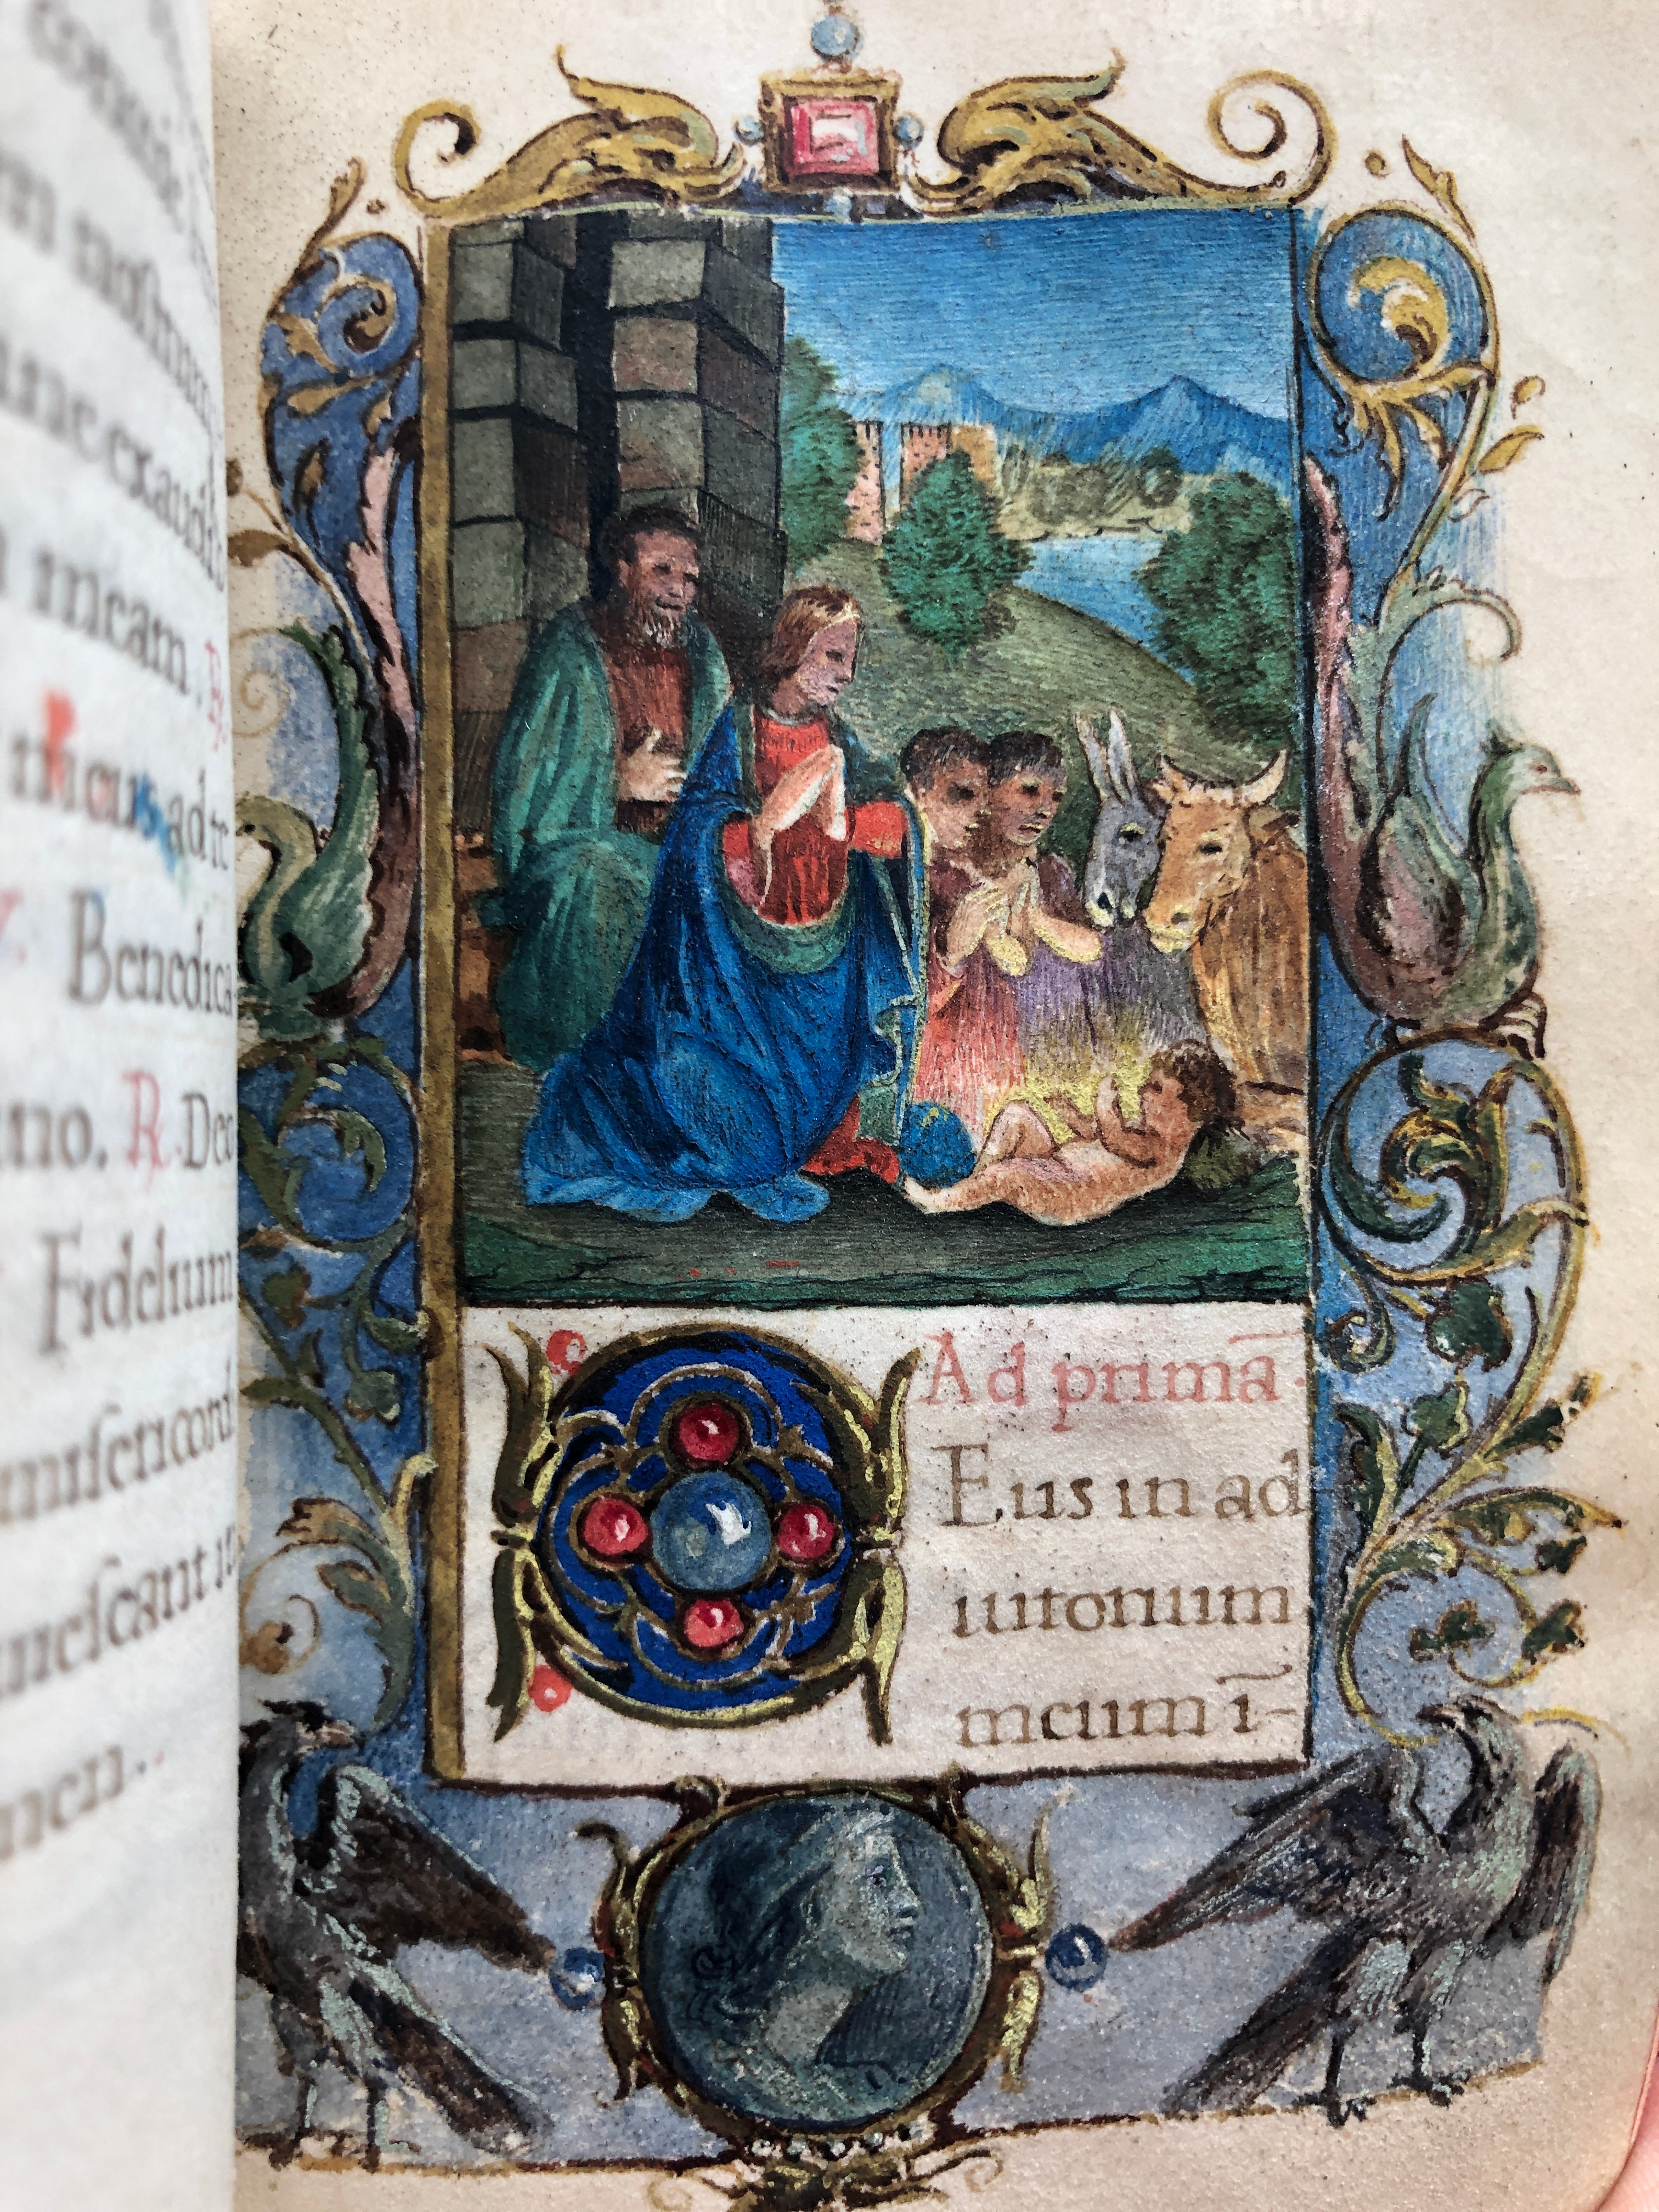 The Nativity miniature in this unfinished manuscript Book of Hours, circa 1500, features a pastoral, almost alpine-like scene in the background. The ox and ass guard the Infant Jesus as Mary kneels in adoration. Compositionally, Joseph plays an ancillary role in this scene and two shepherds join in the adoration. The border features peacocks, a symbol of eternal life and eagles, the symbol of John the Evangelist.